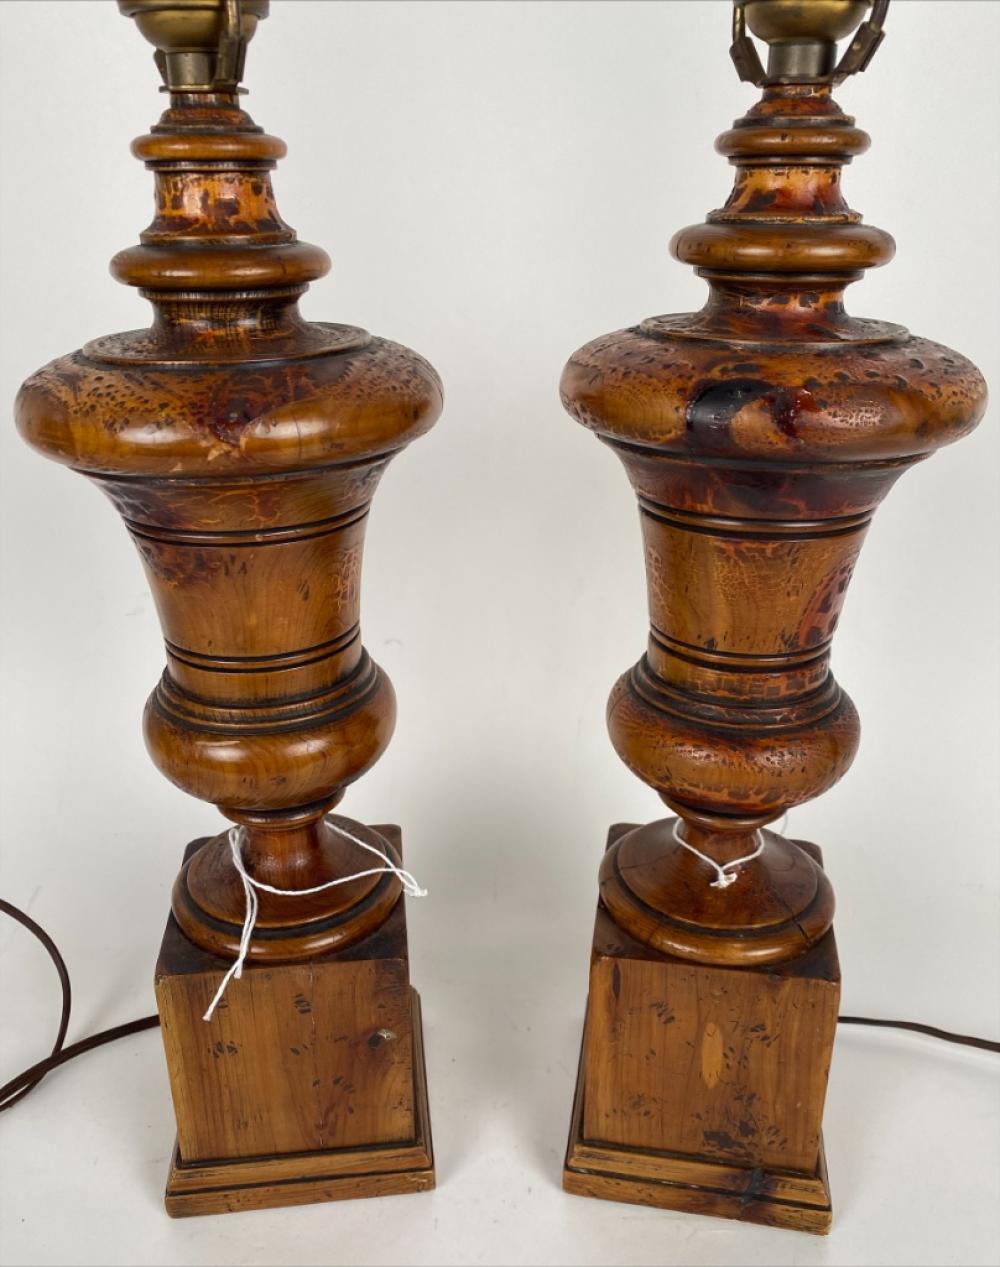 PAIR OF TURNED WOODEN TABLE LAMPS